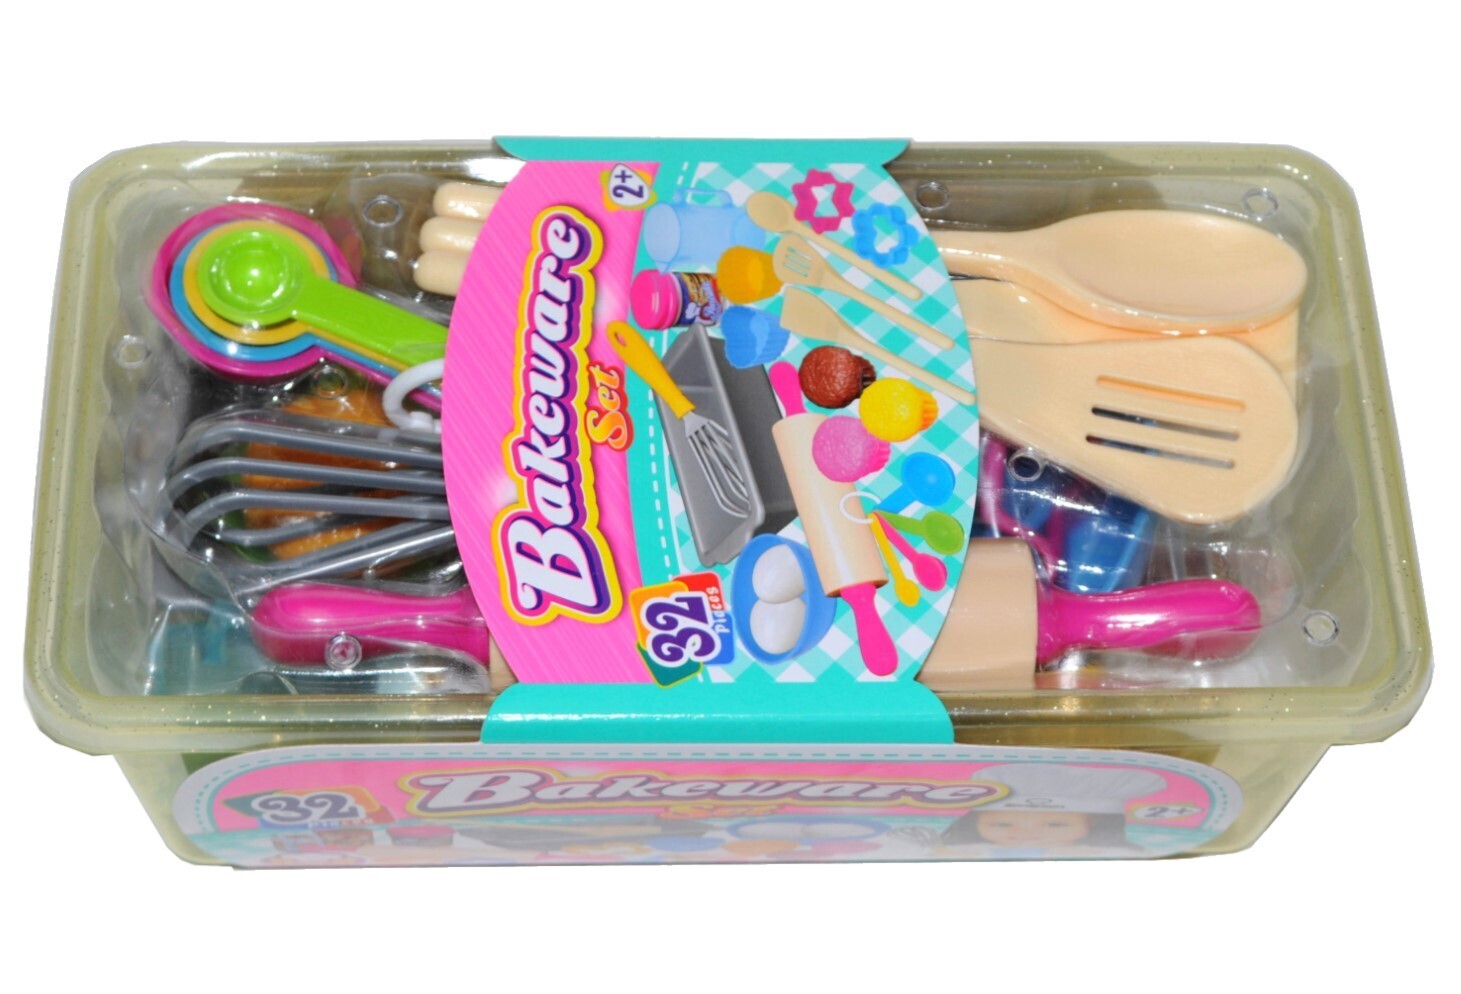 Plastic Pretend Bakeware set with 32 Pieces in a tub